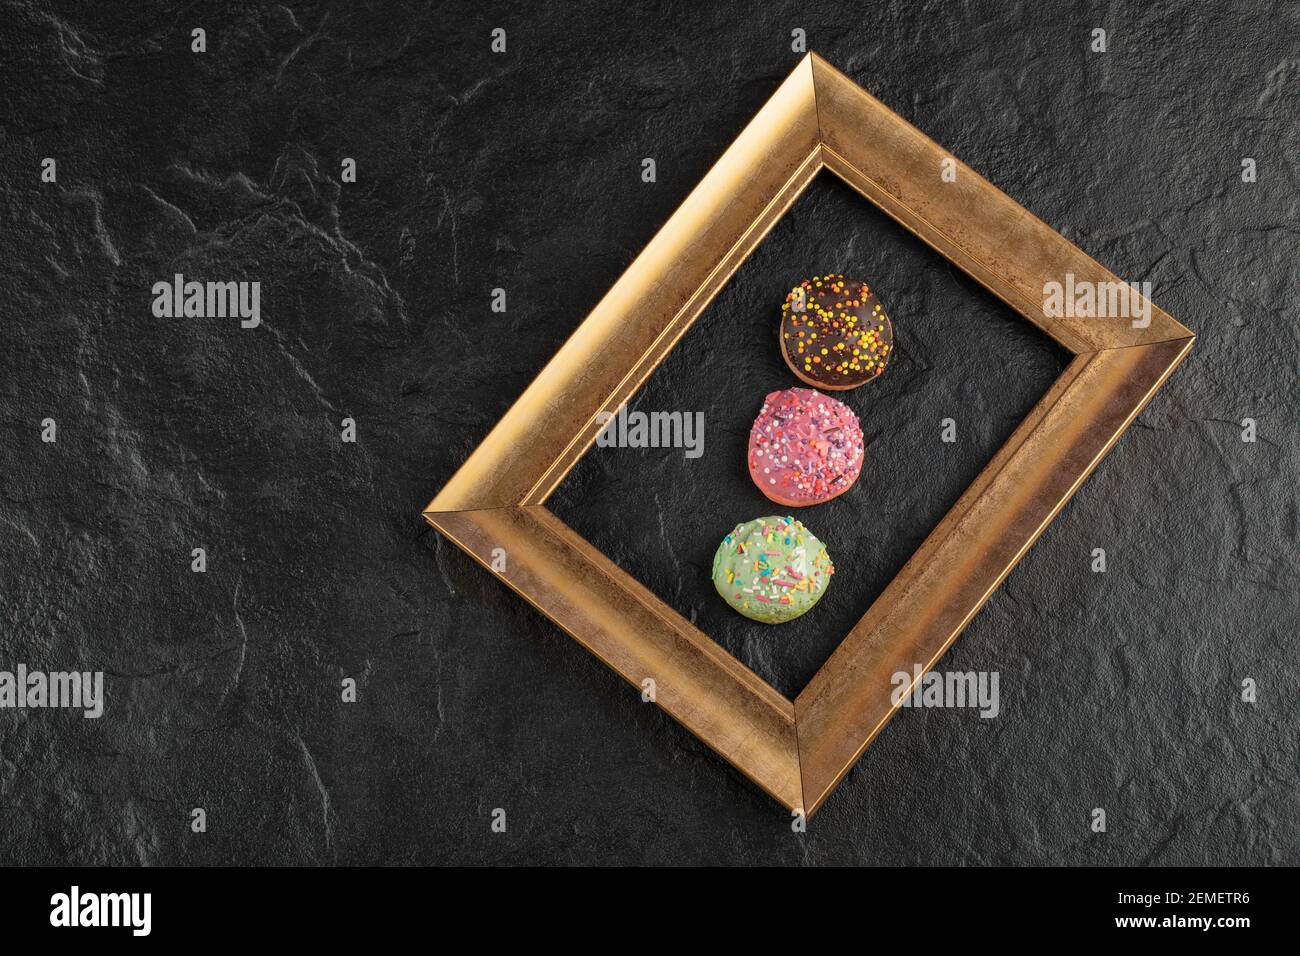 Sweet small doughnuts with sprinkles on a black background Stock Photo